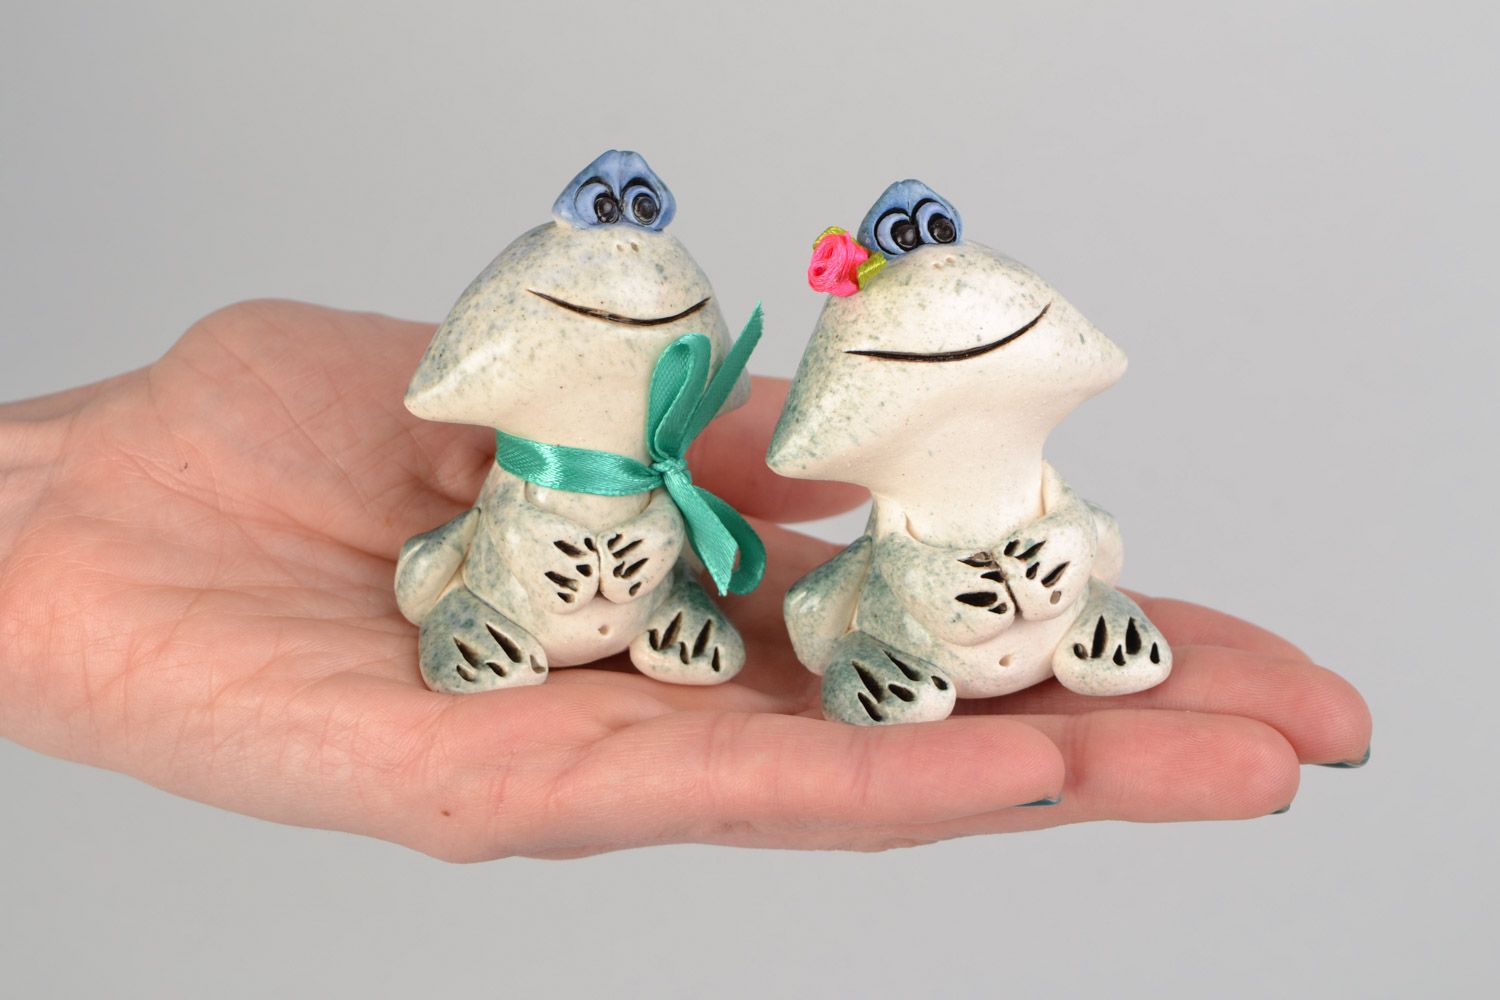 Handmade decorative ceramic painted figurines set of 2 pieces cute frogs home decor photo 2